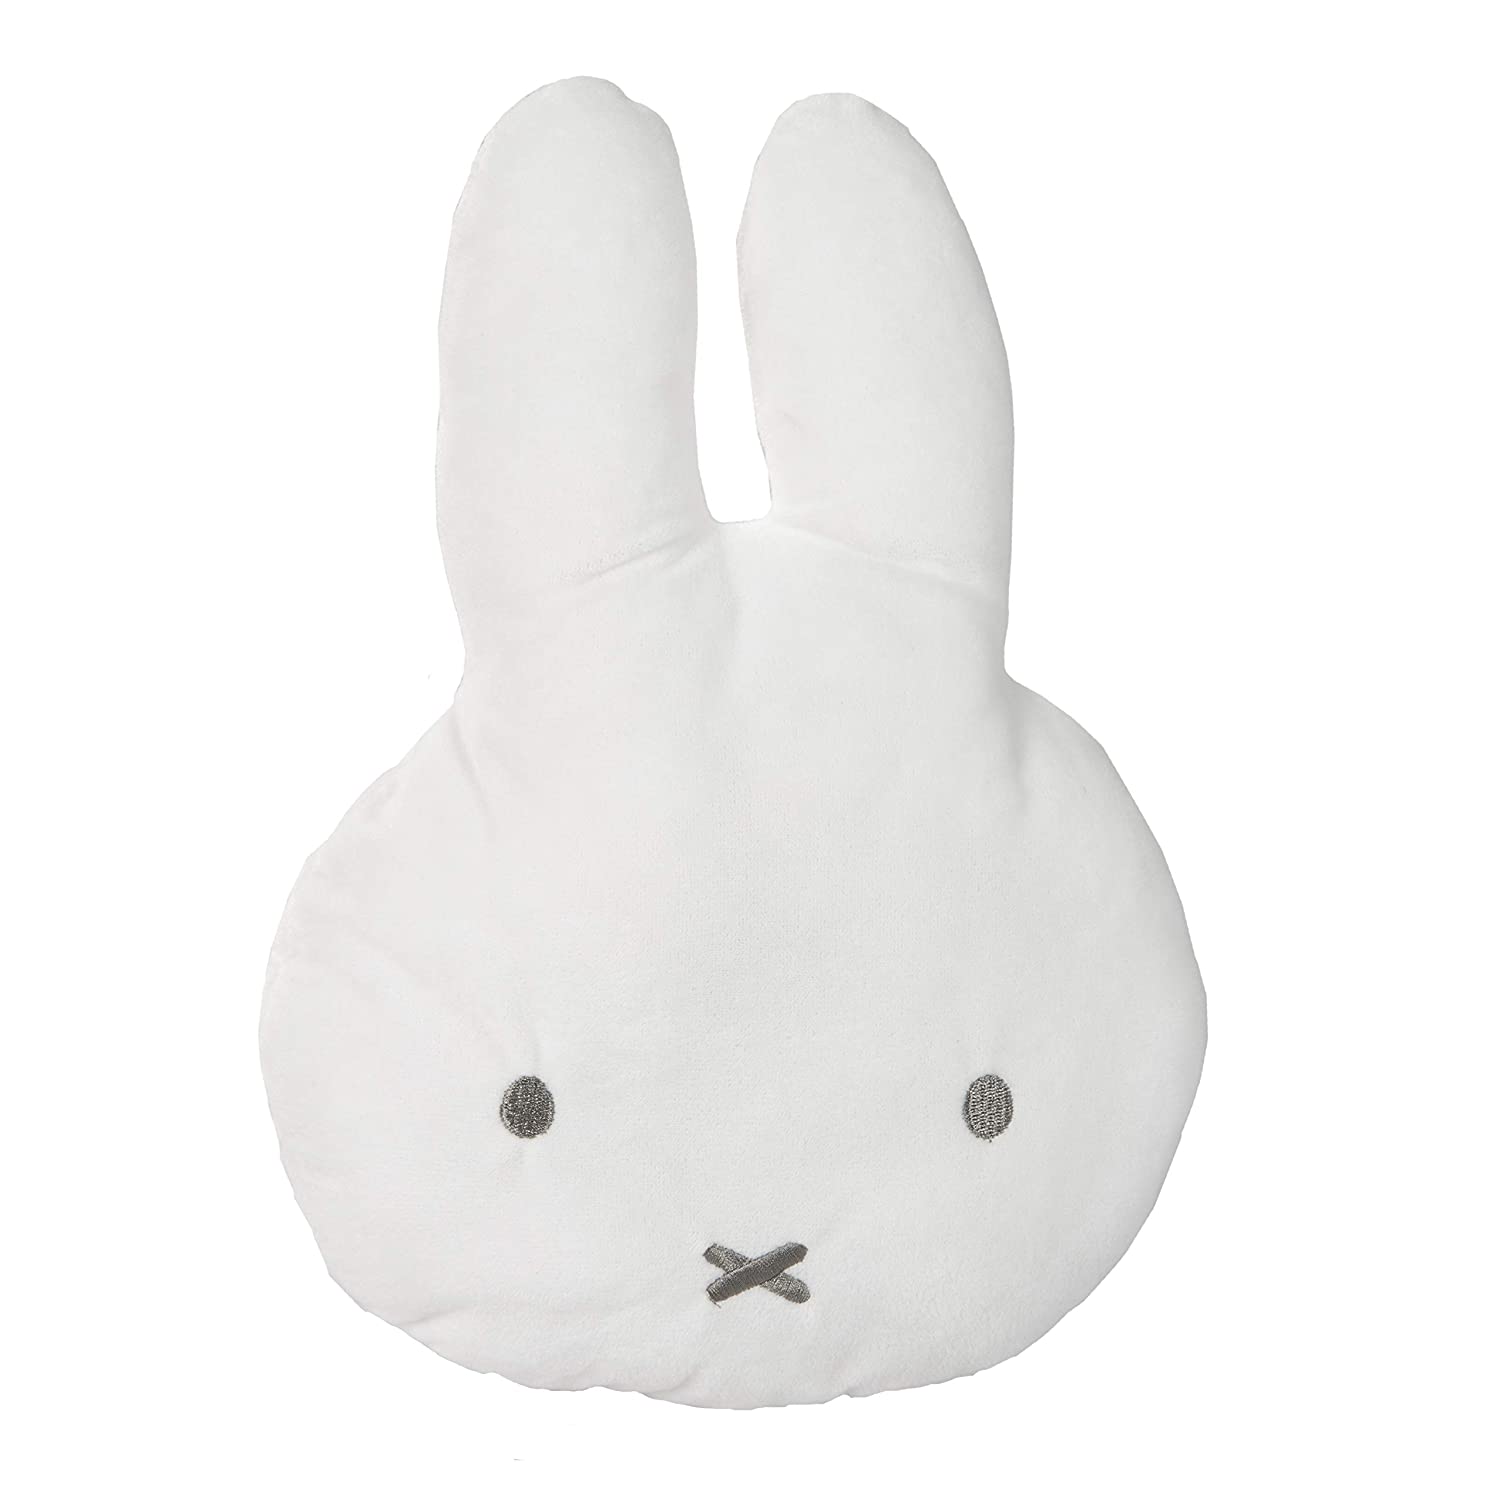 roba Miffy decorative cushion for baby and children\'s room, cuddly pillow, cuddly pillow, baby pillow made of baby-soft coral fleece